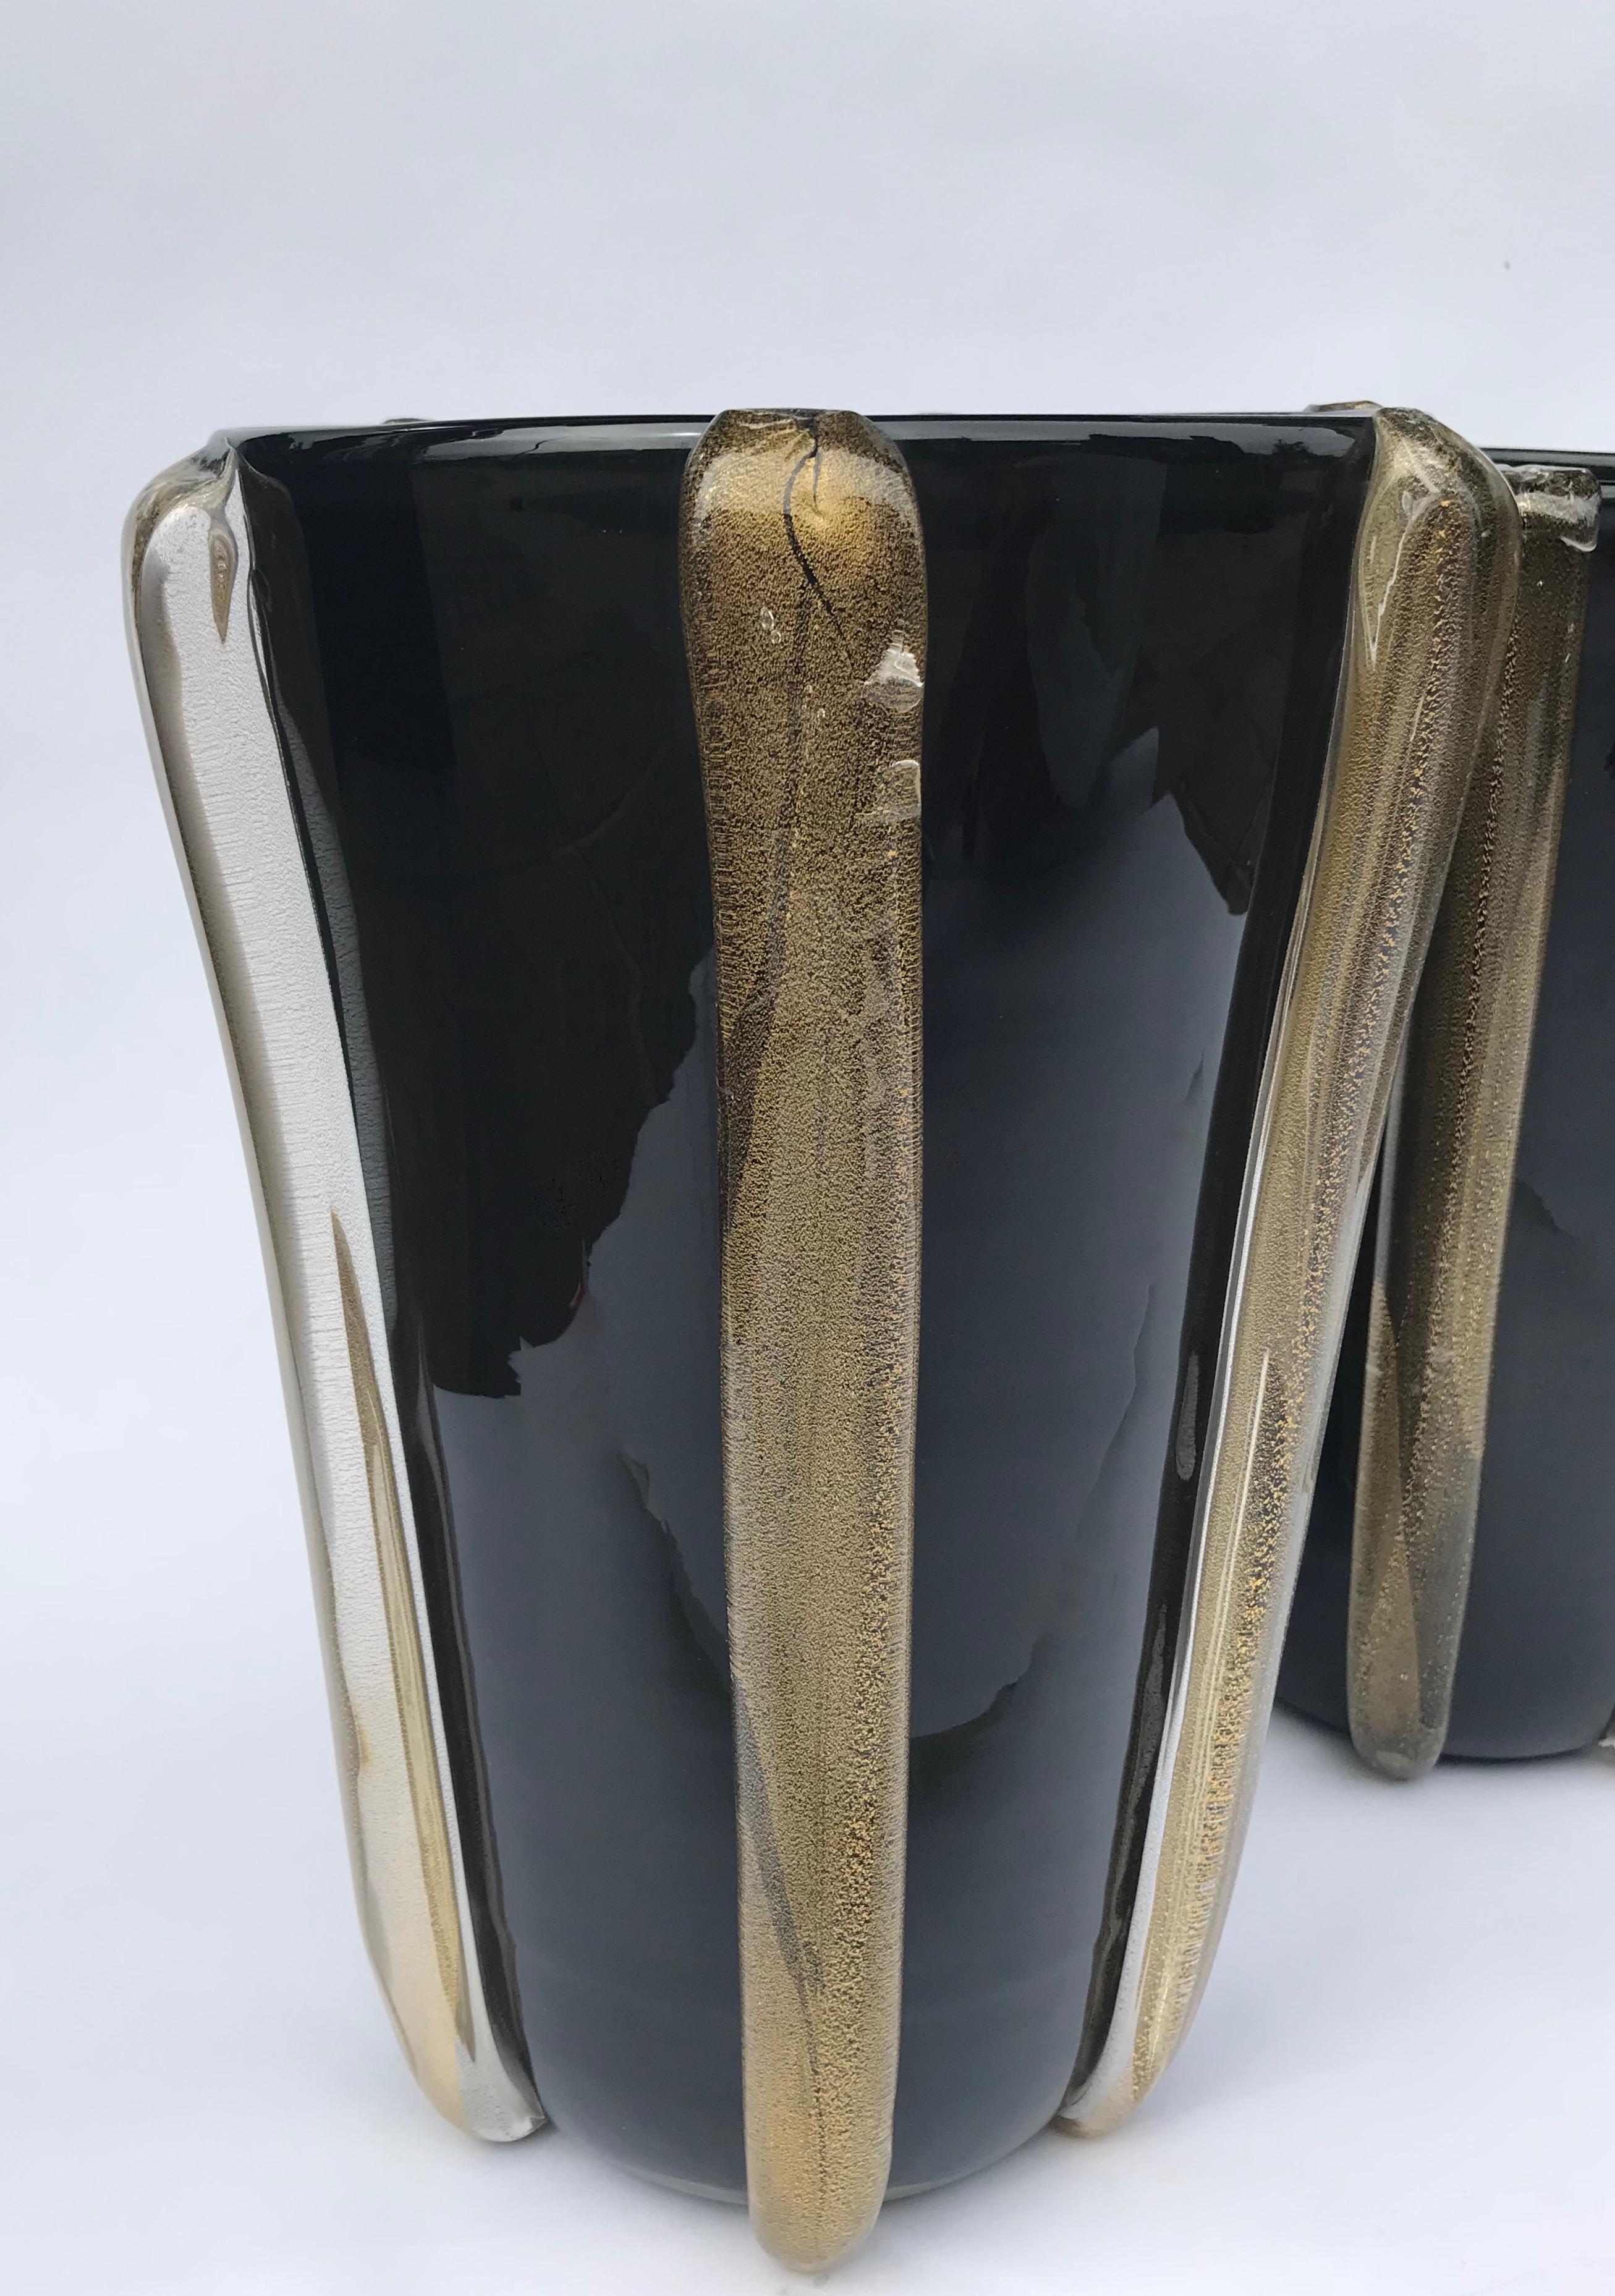 Produced by hand on the island of Murano in Venice, Italy, this pair of black Murano glass vases has clear glass and gold leaf detail. The gold shines through the clear glass giving a beautiful iridescence when the light catches.

Both vases are